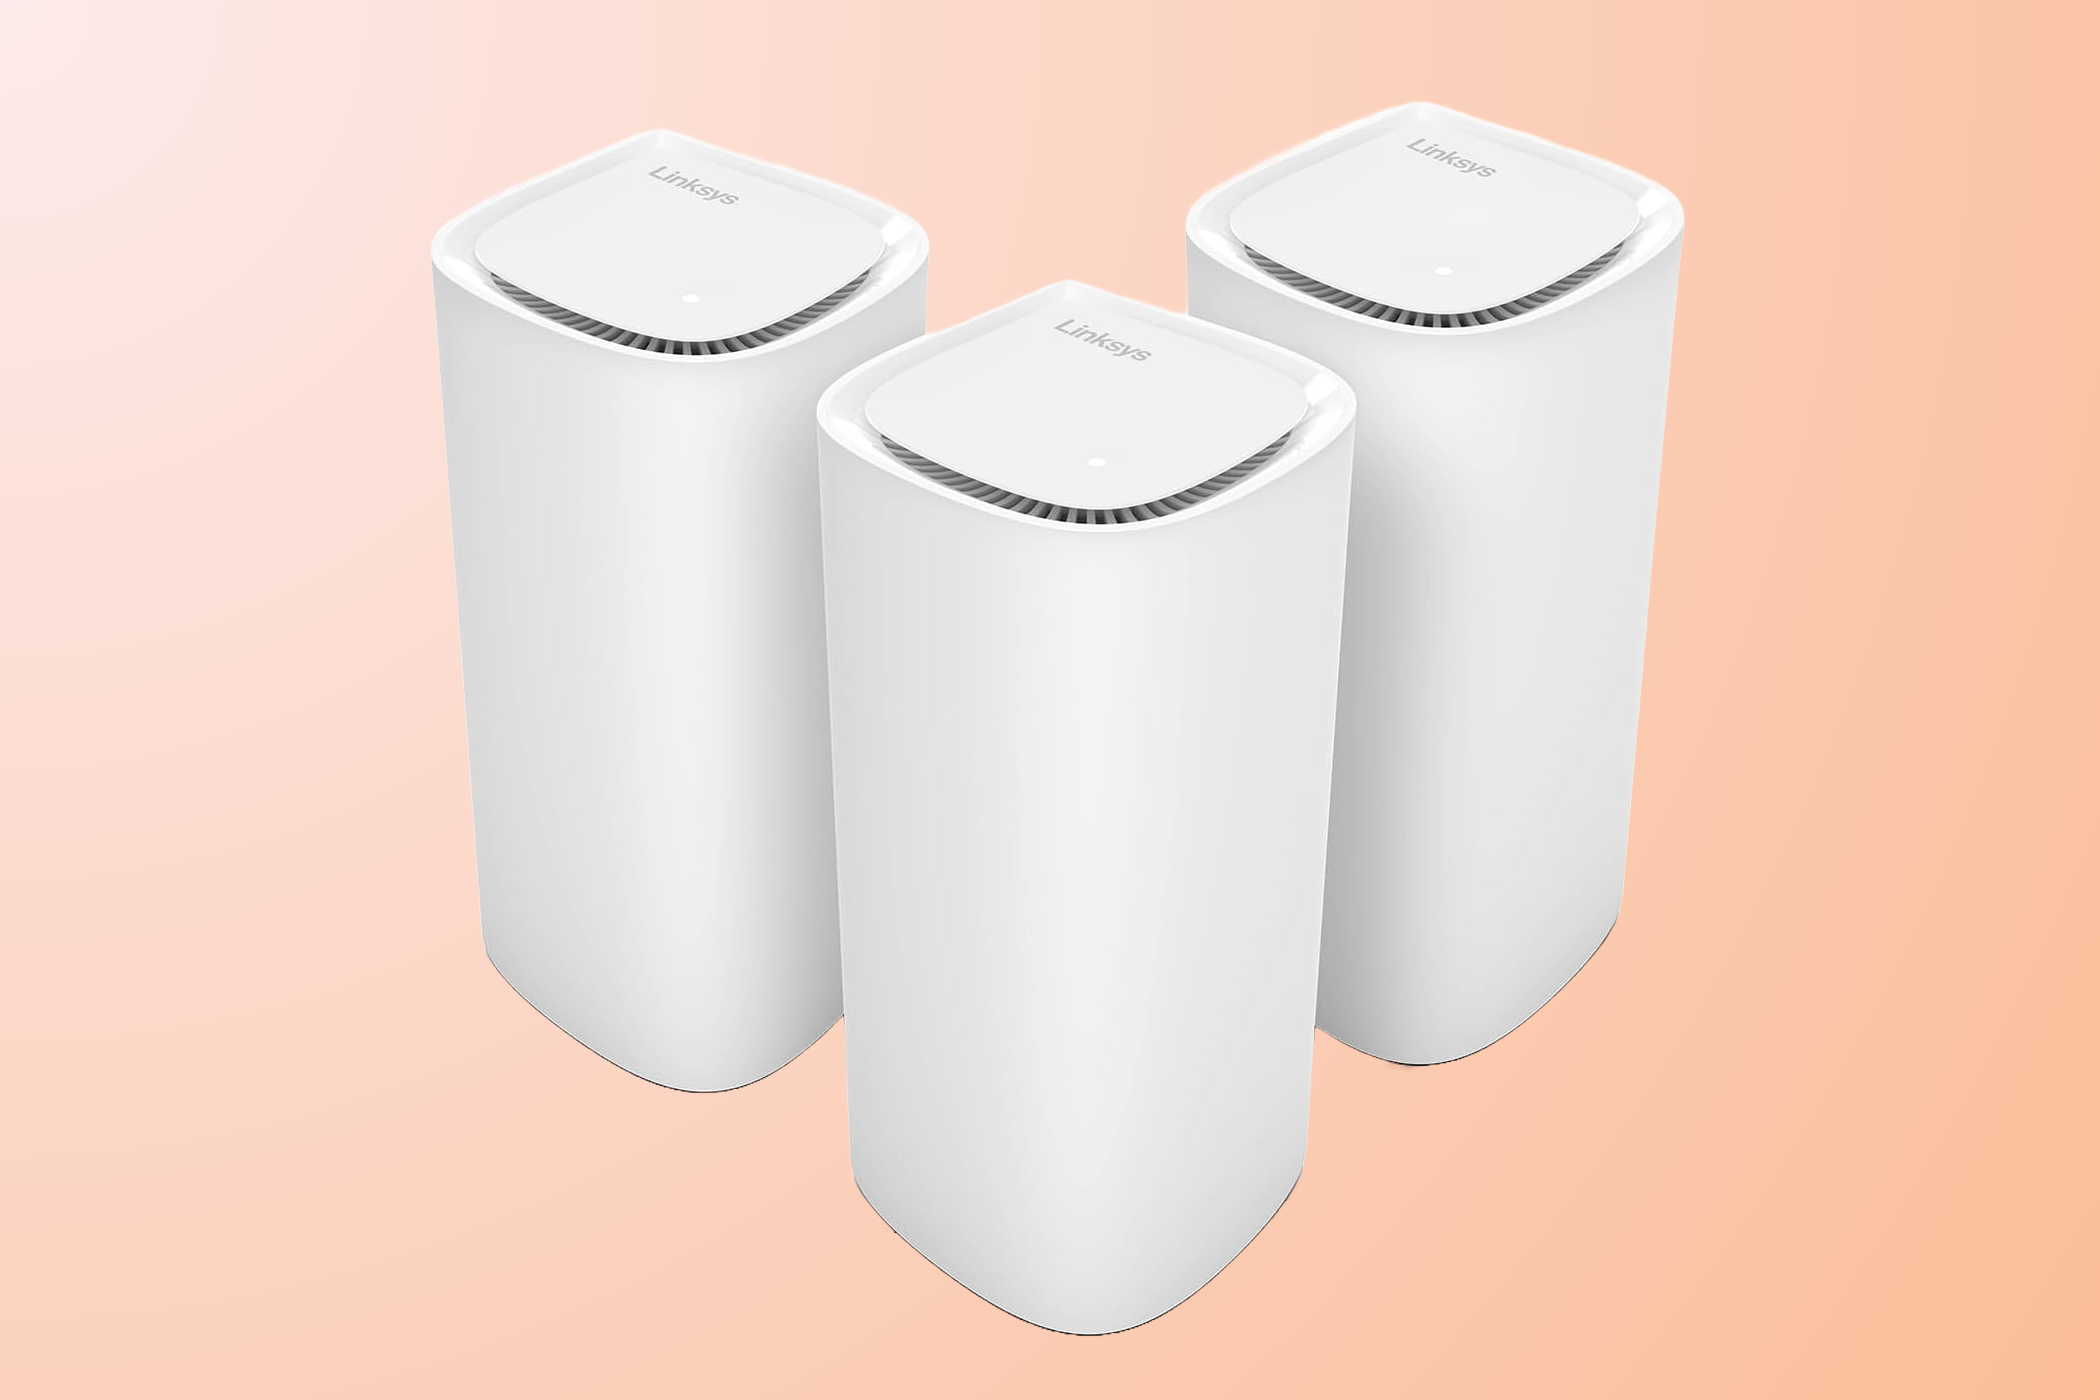 Linksys Velop Pro 7 mesh router on a peach background